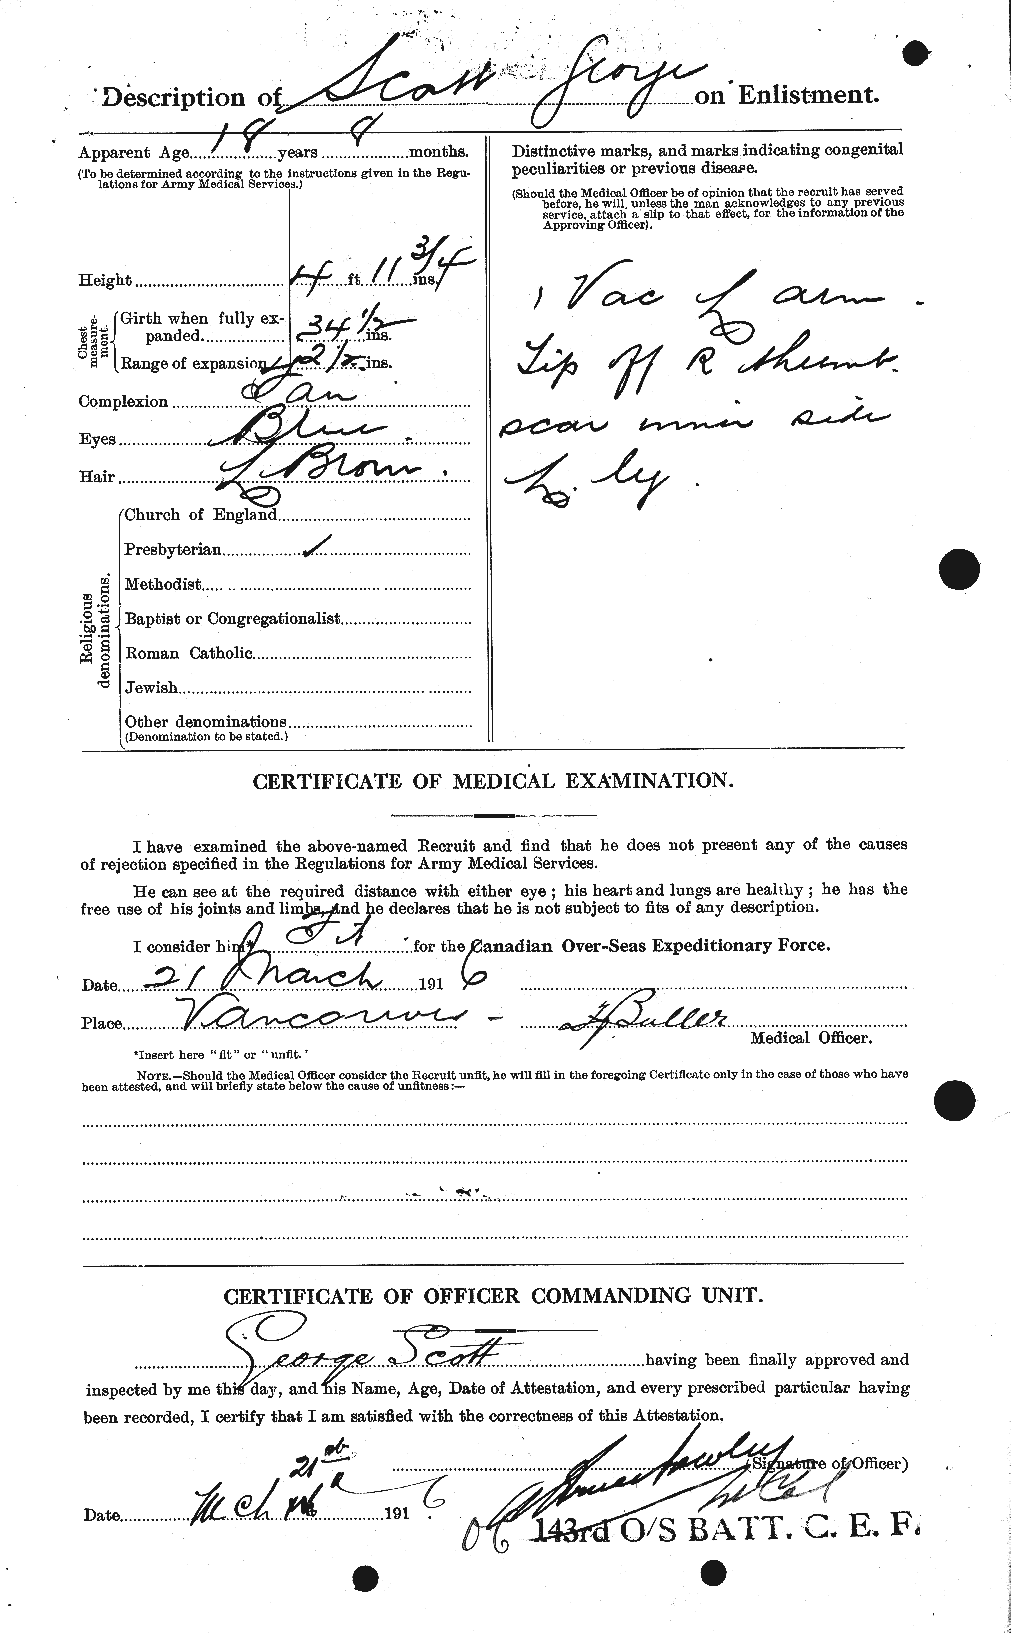 Personnel Records of the First World War - CEF 084365b